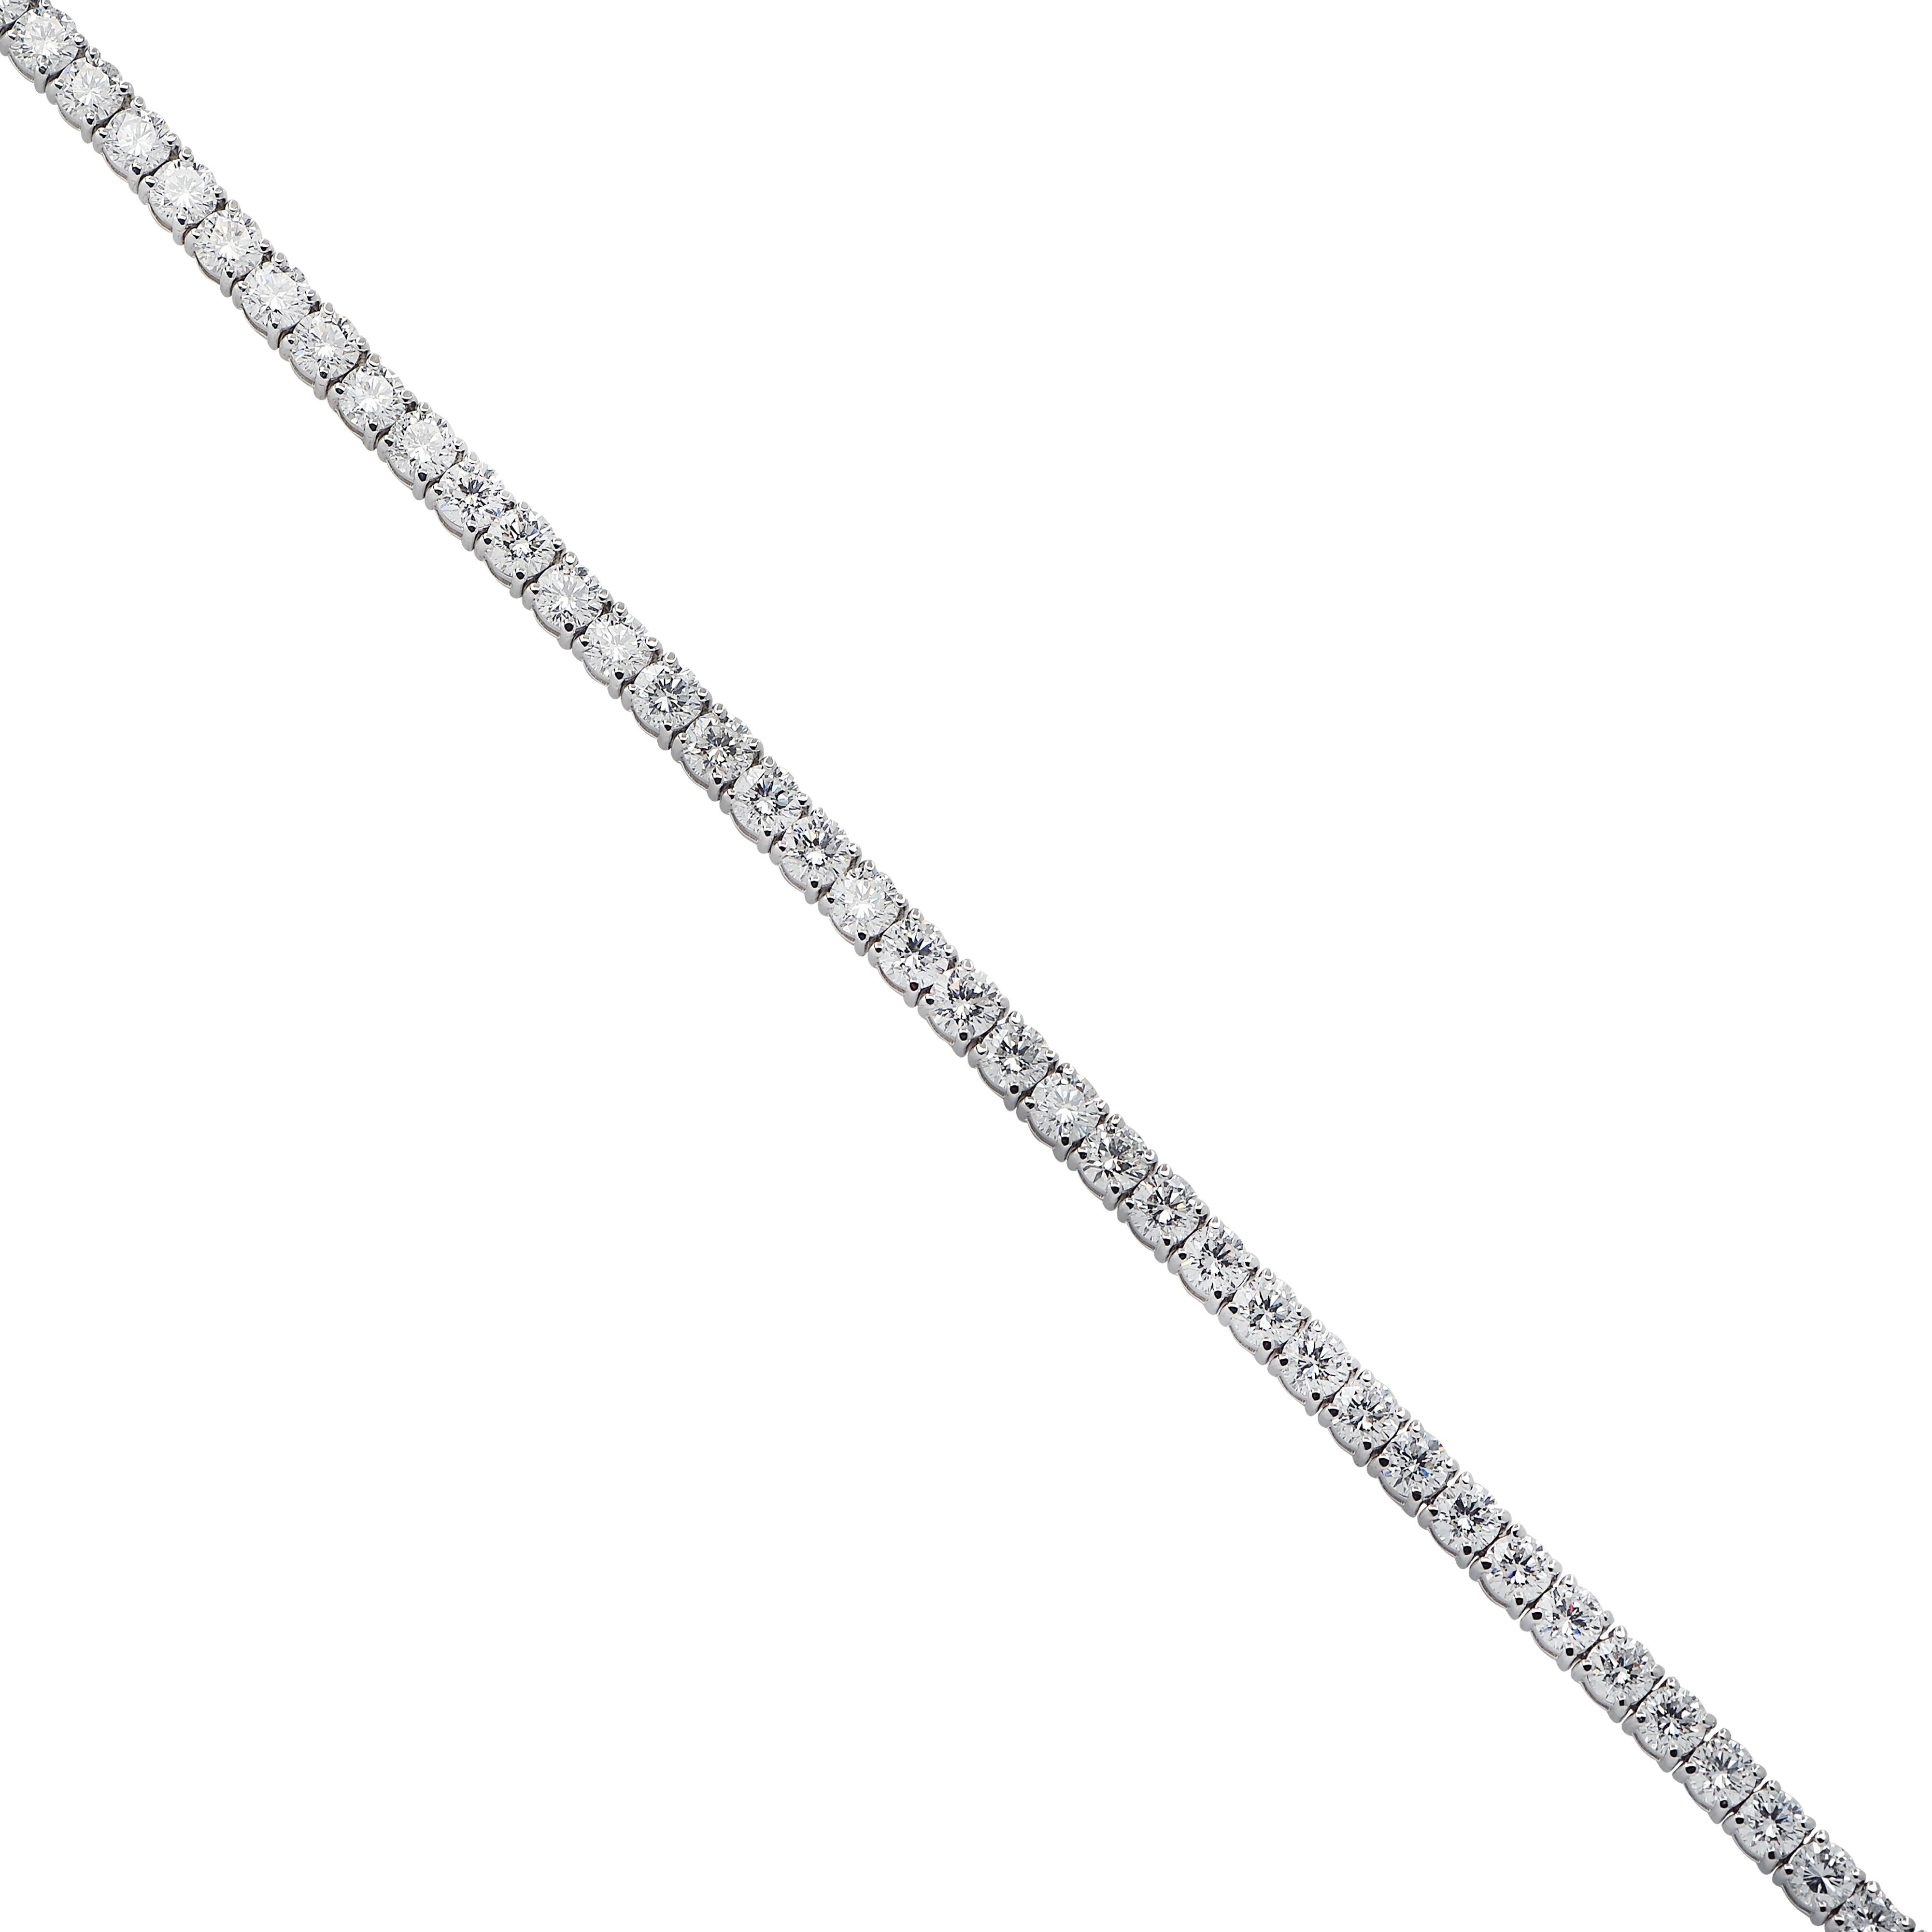 Exquisite diamond tennis bracelet crafted in platinum, showcasing 36 stunning GIA certified round brilliant cut diamonds weighing 14.57 carats total, J-K color, -VVS-VS clarity. Each diamond is carefully selected, perfectly matched and set in a